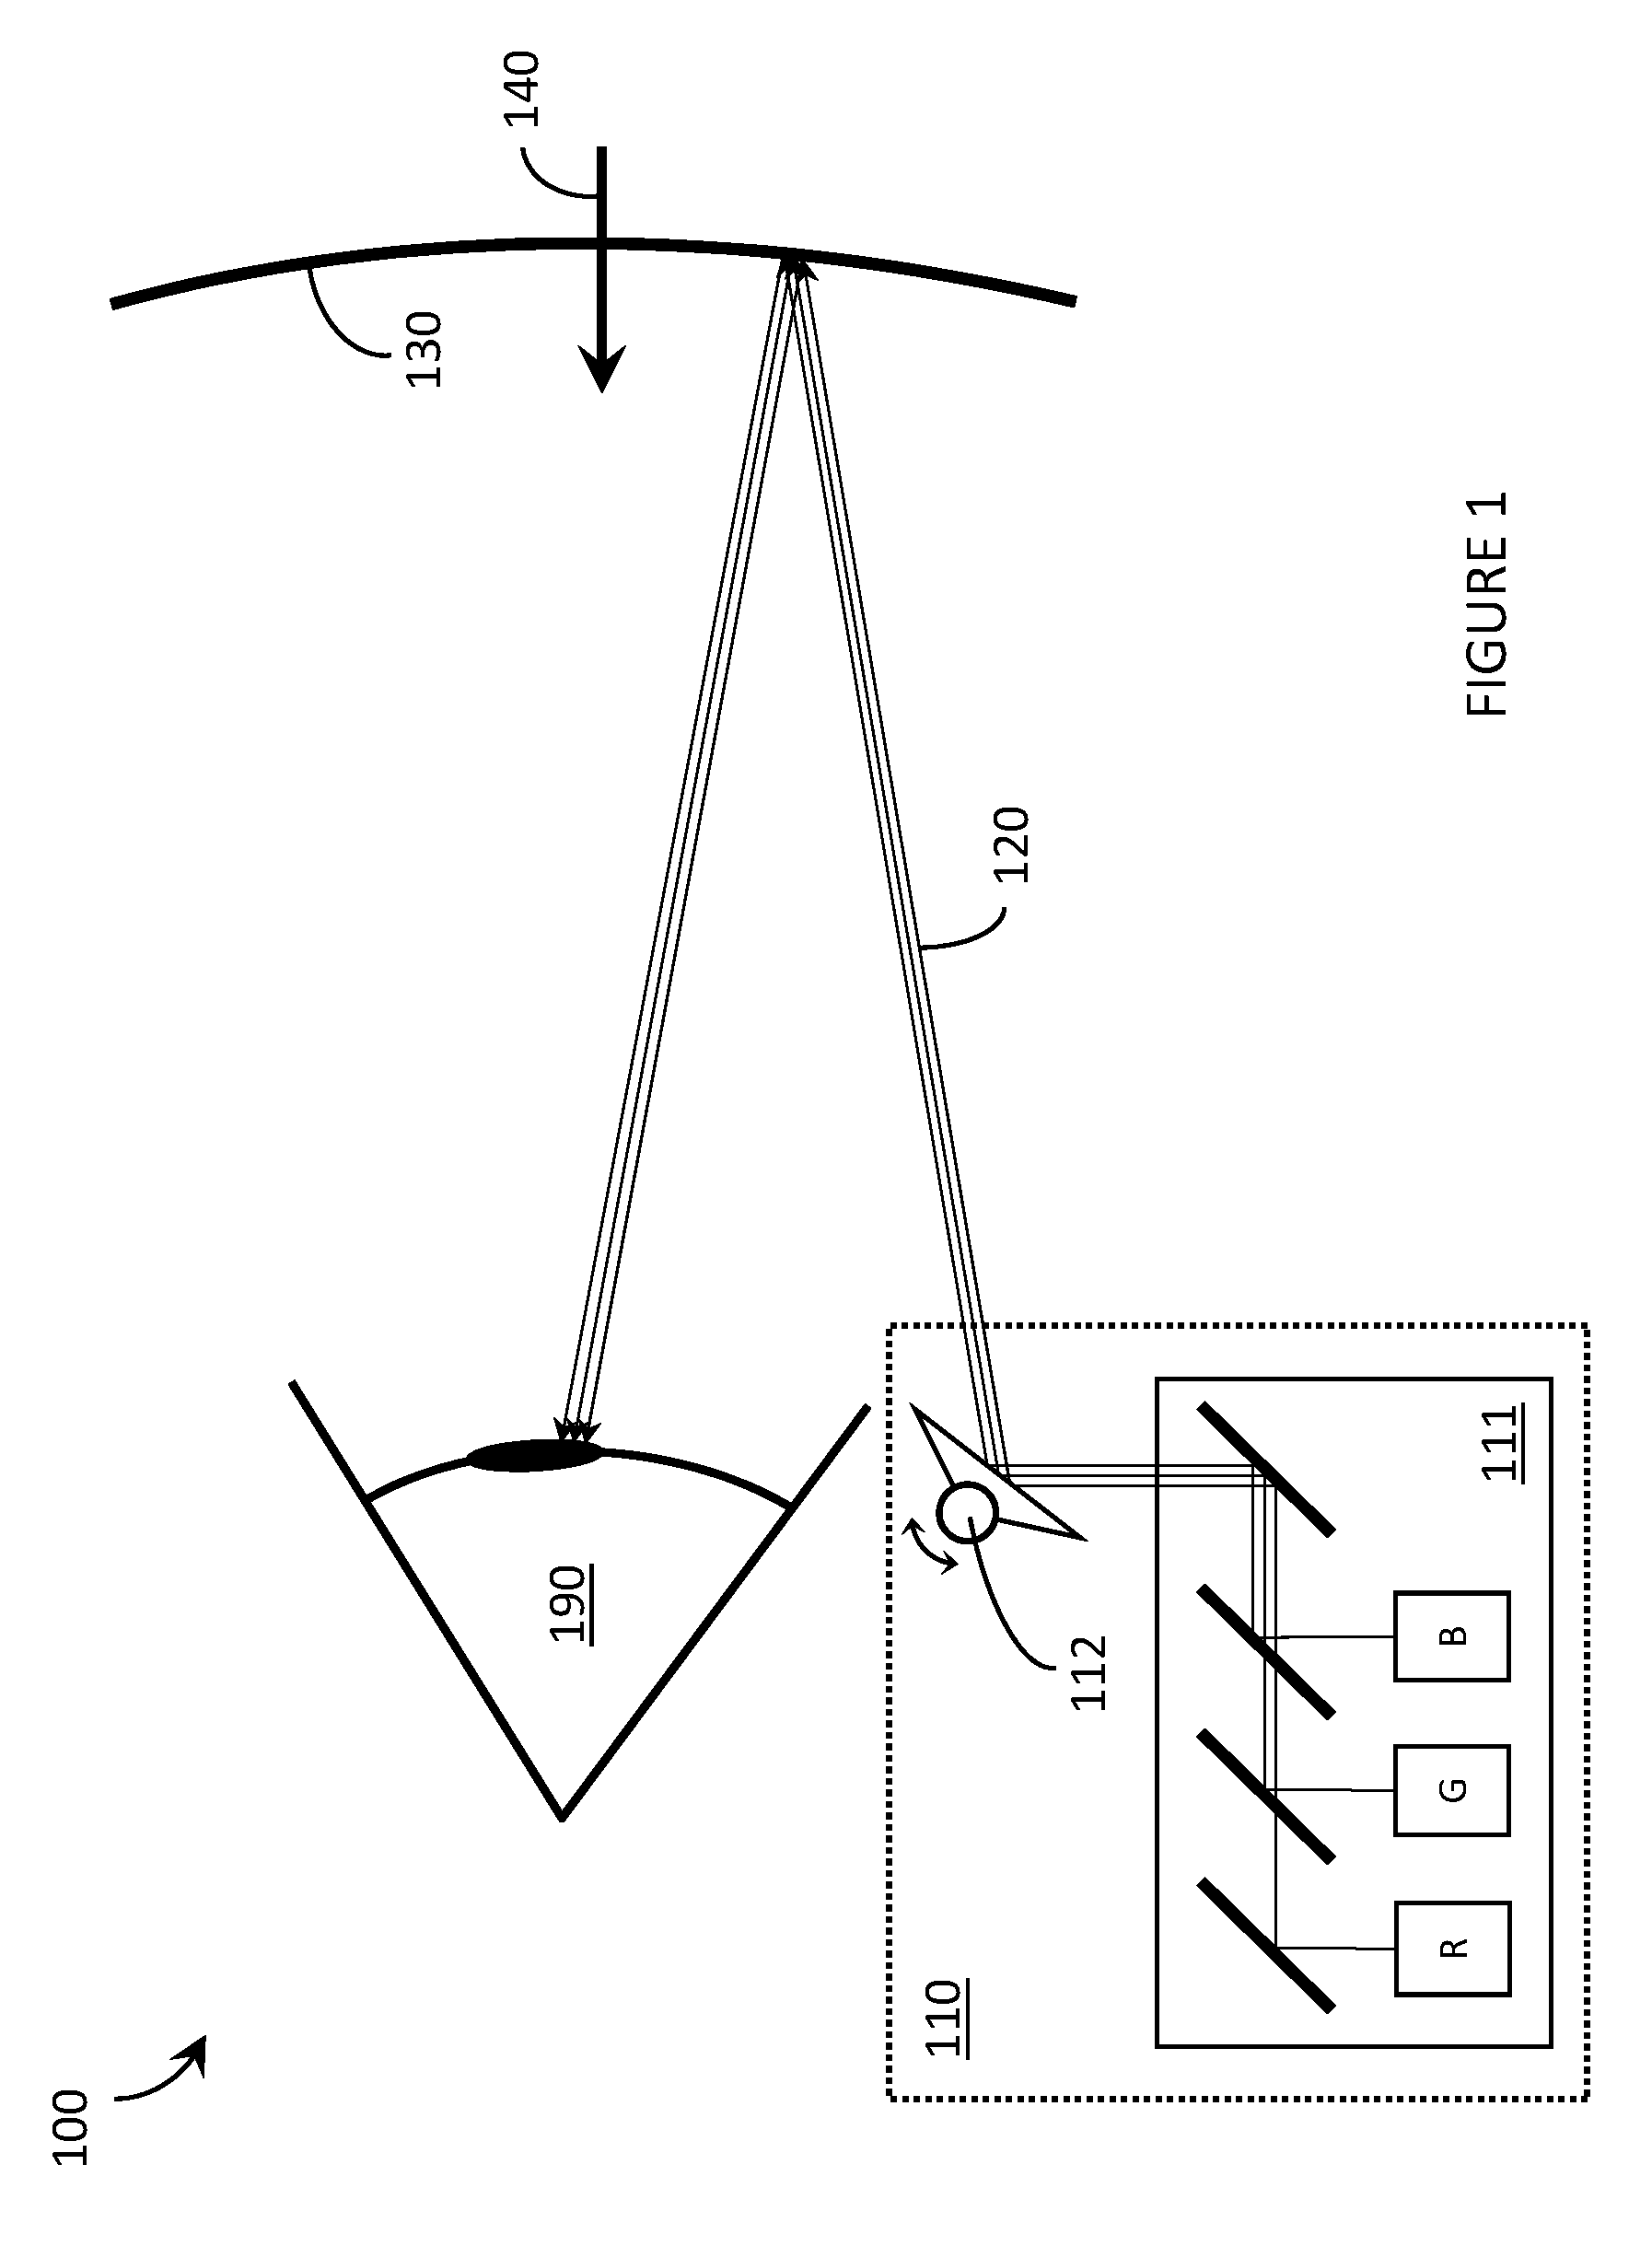 Systems, devices, and methods that integrate eye tracking and scanning laser projection in wearable heads-up displays